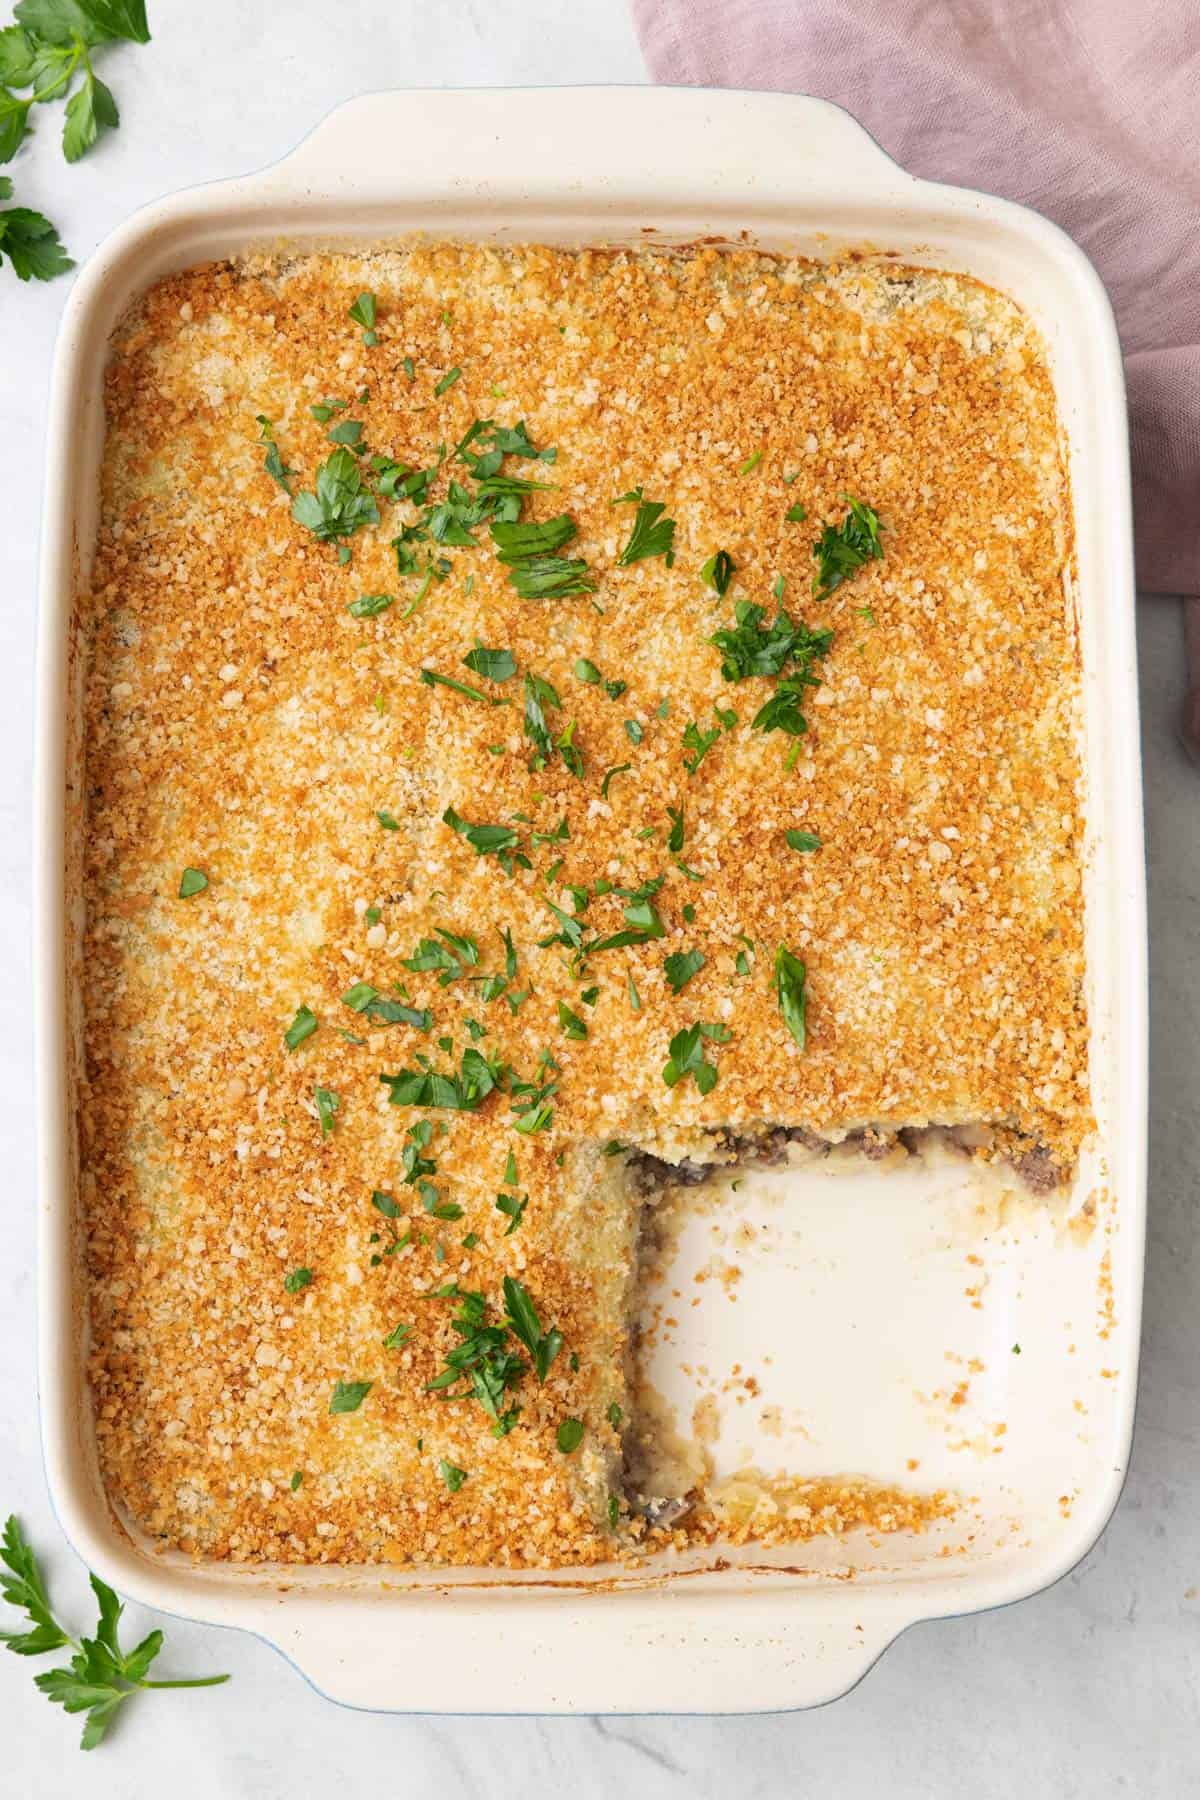 Potato and beef bake in a baking dish with a square serving removed, golden brown breadcrumb, and garnished with fresh chopped parsley.